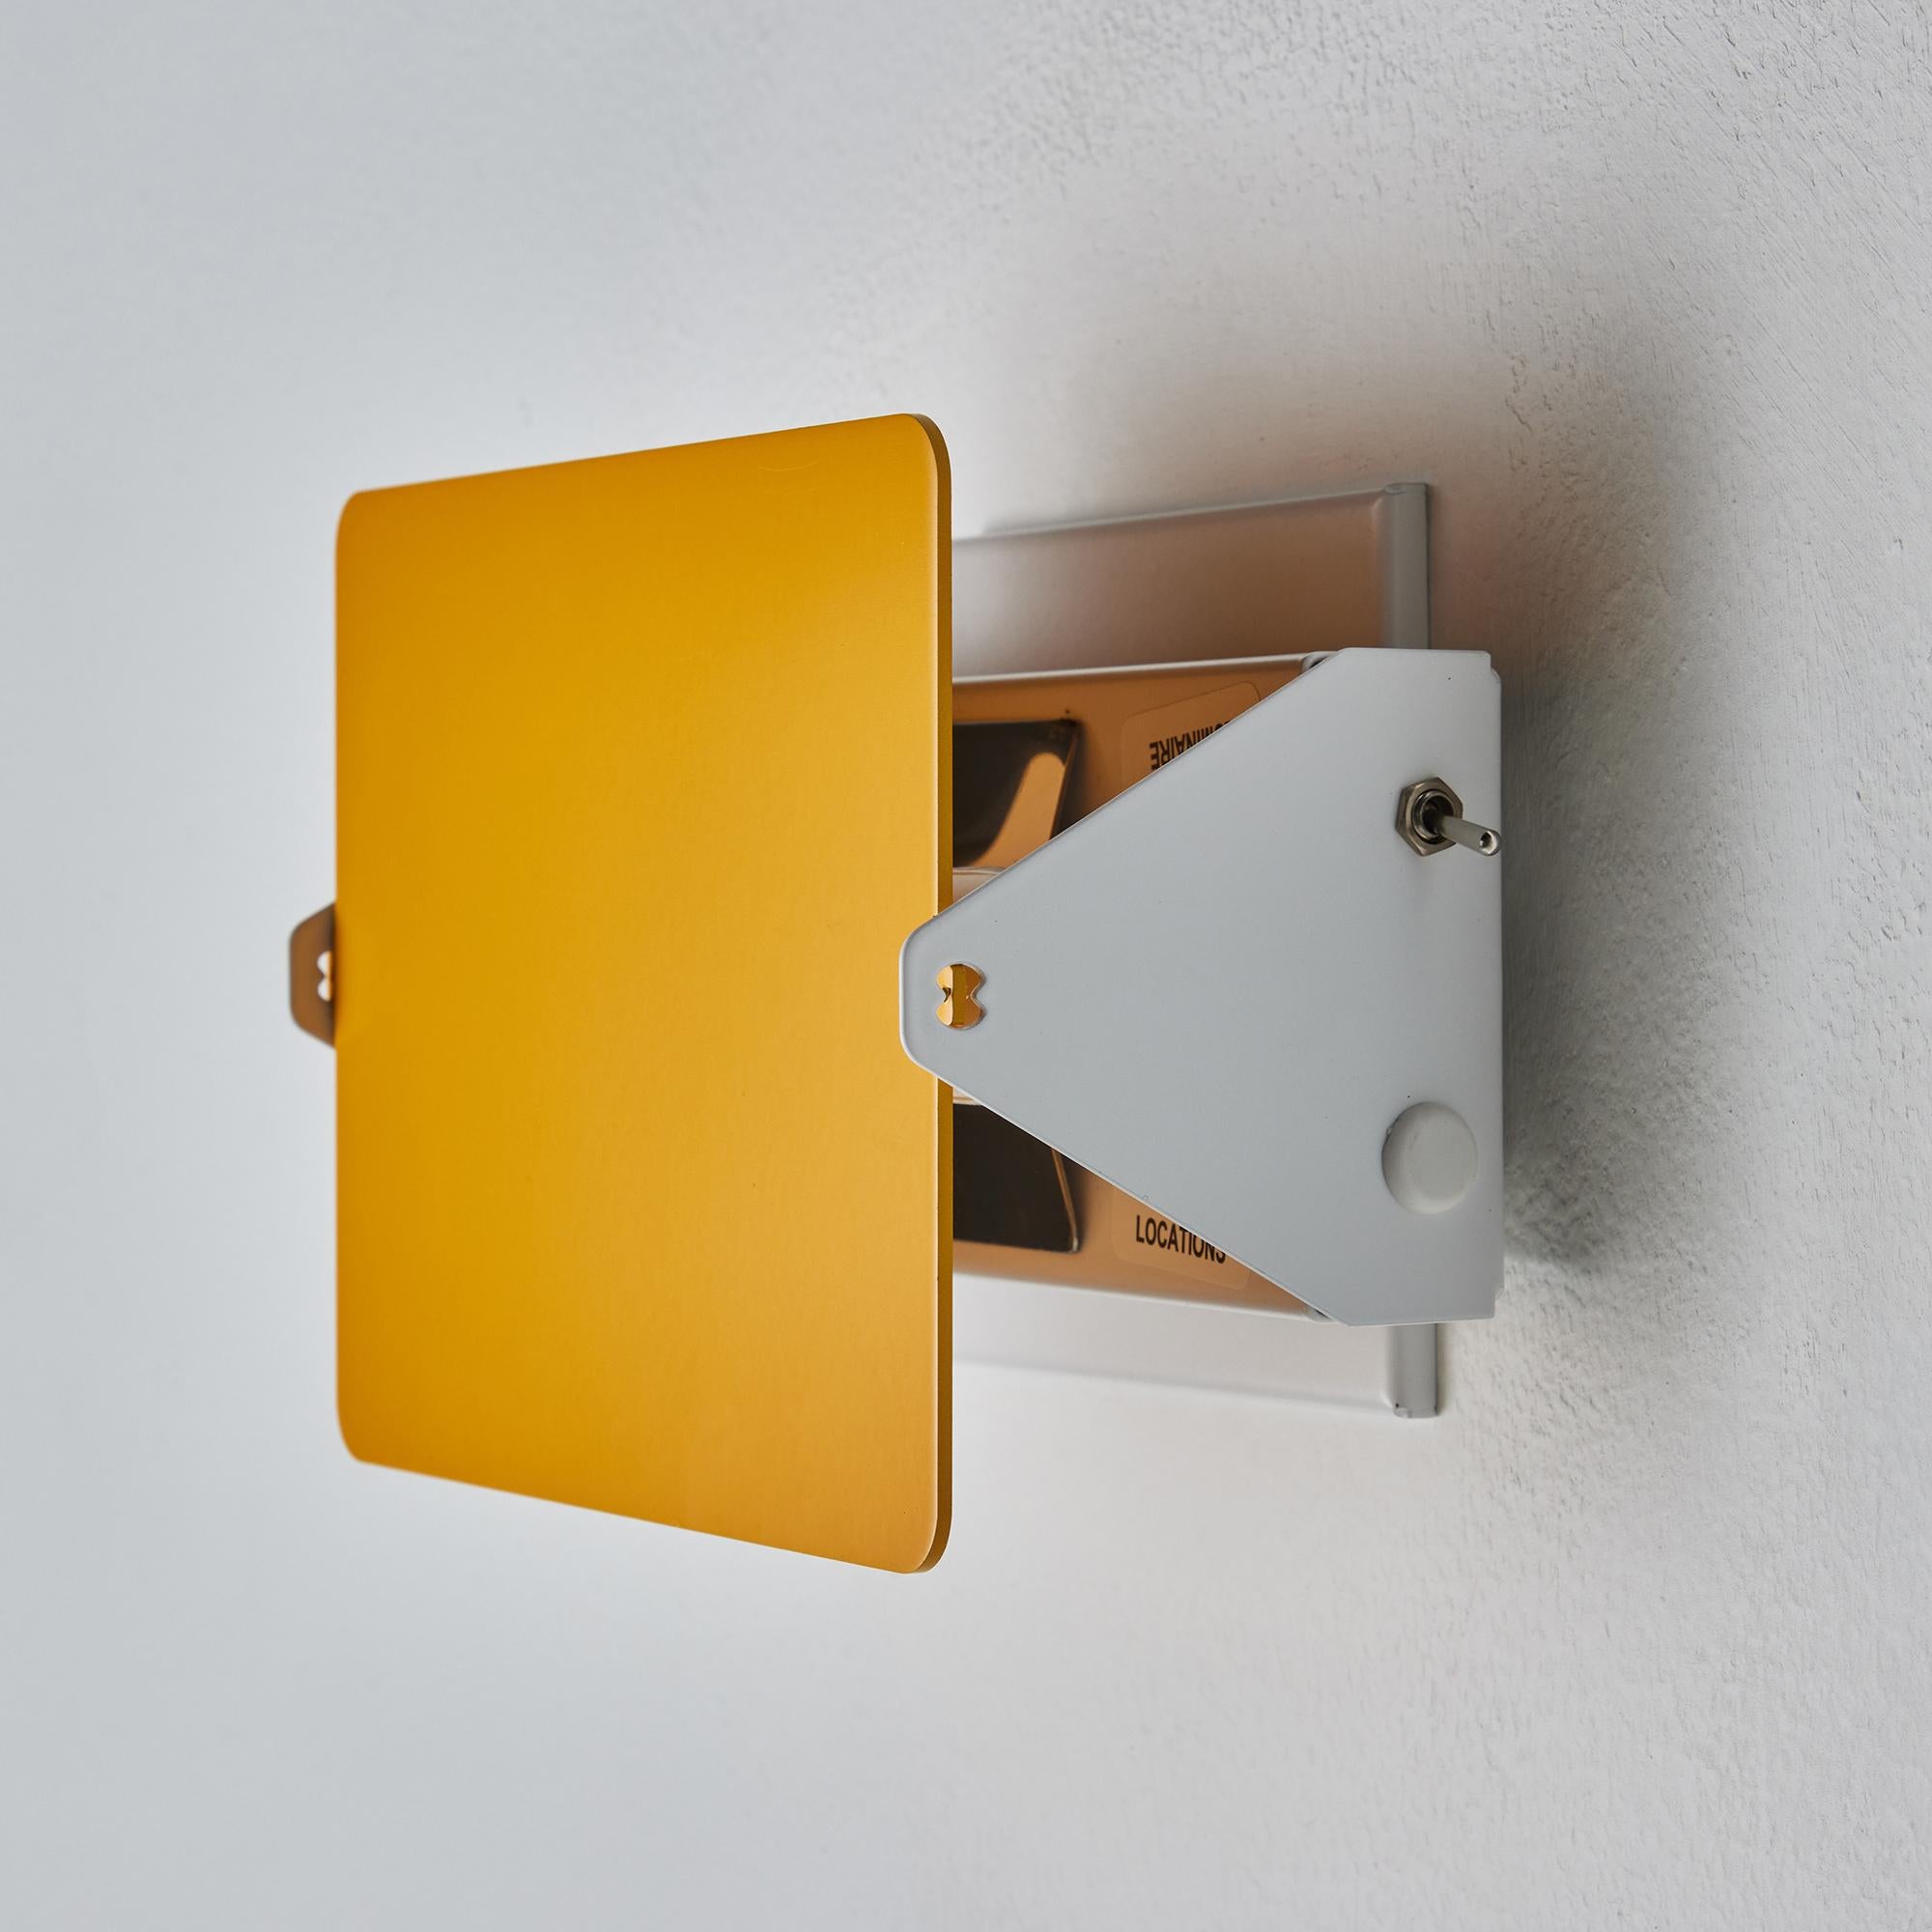 Anodized Charlotte Perriand 'Applique à Volet Pivotant' Wall Light in Yellow for Nemo